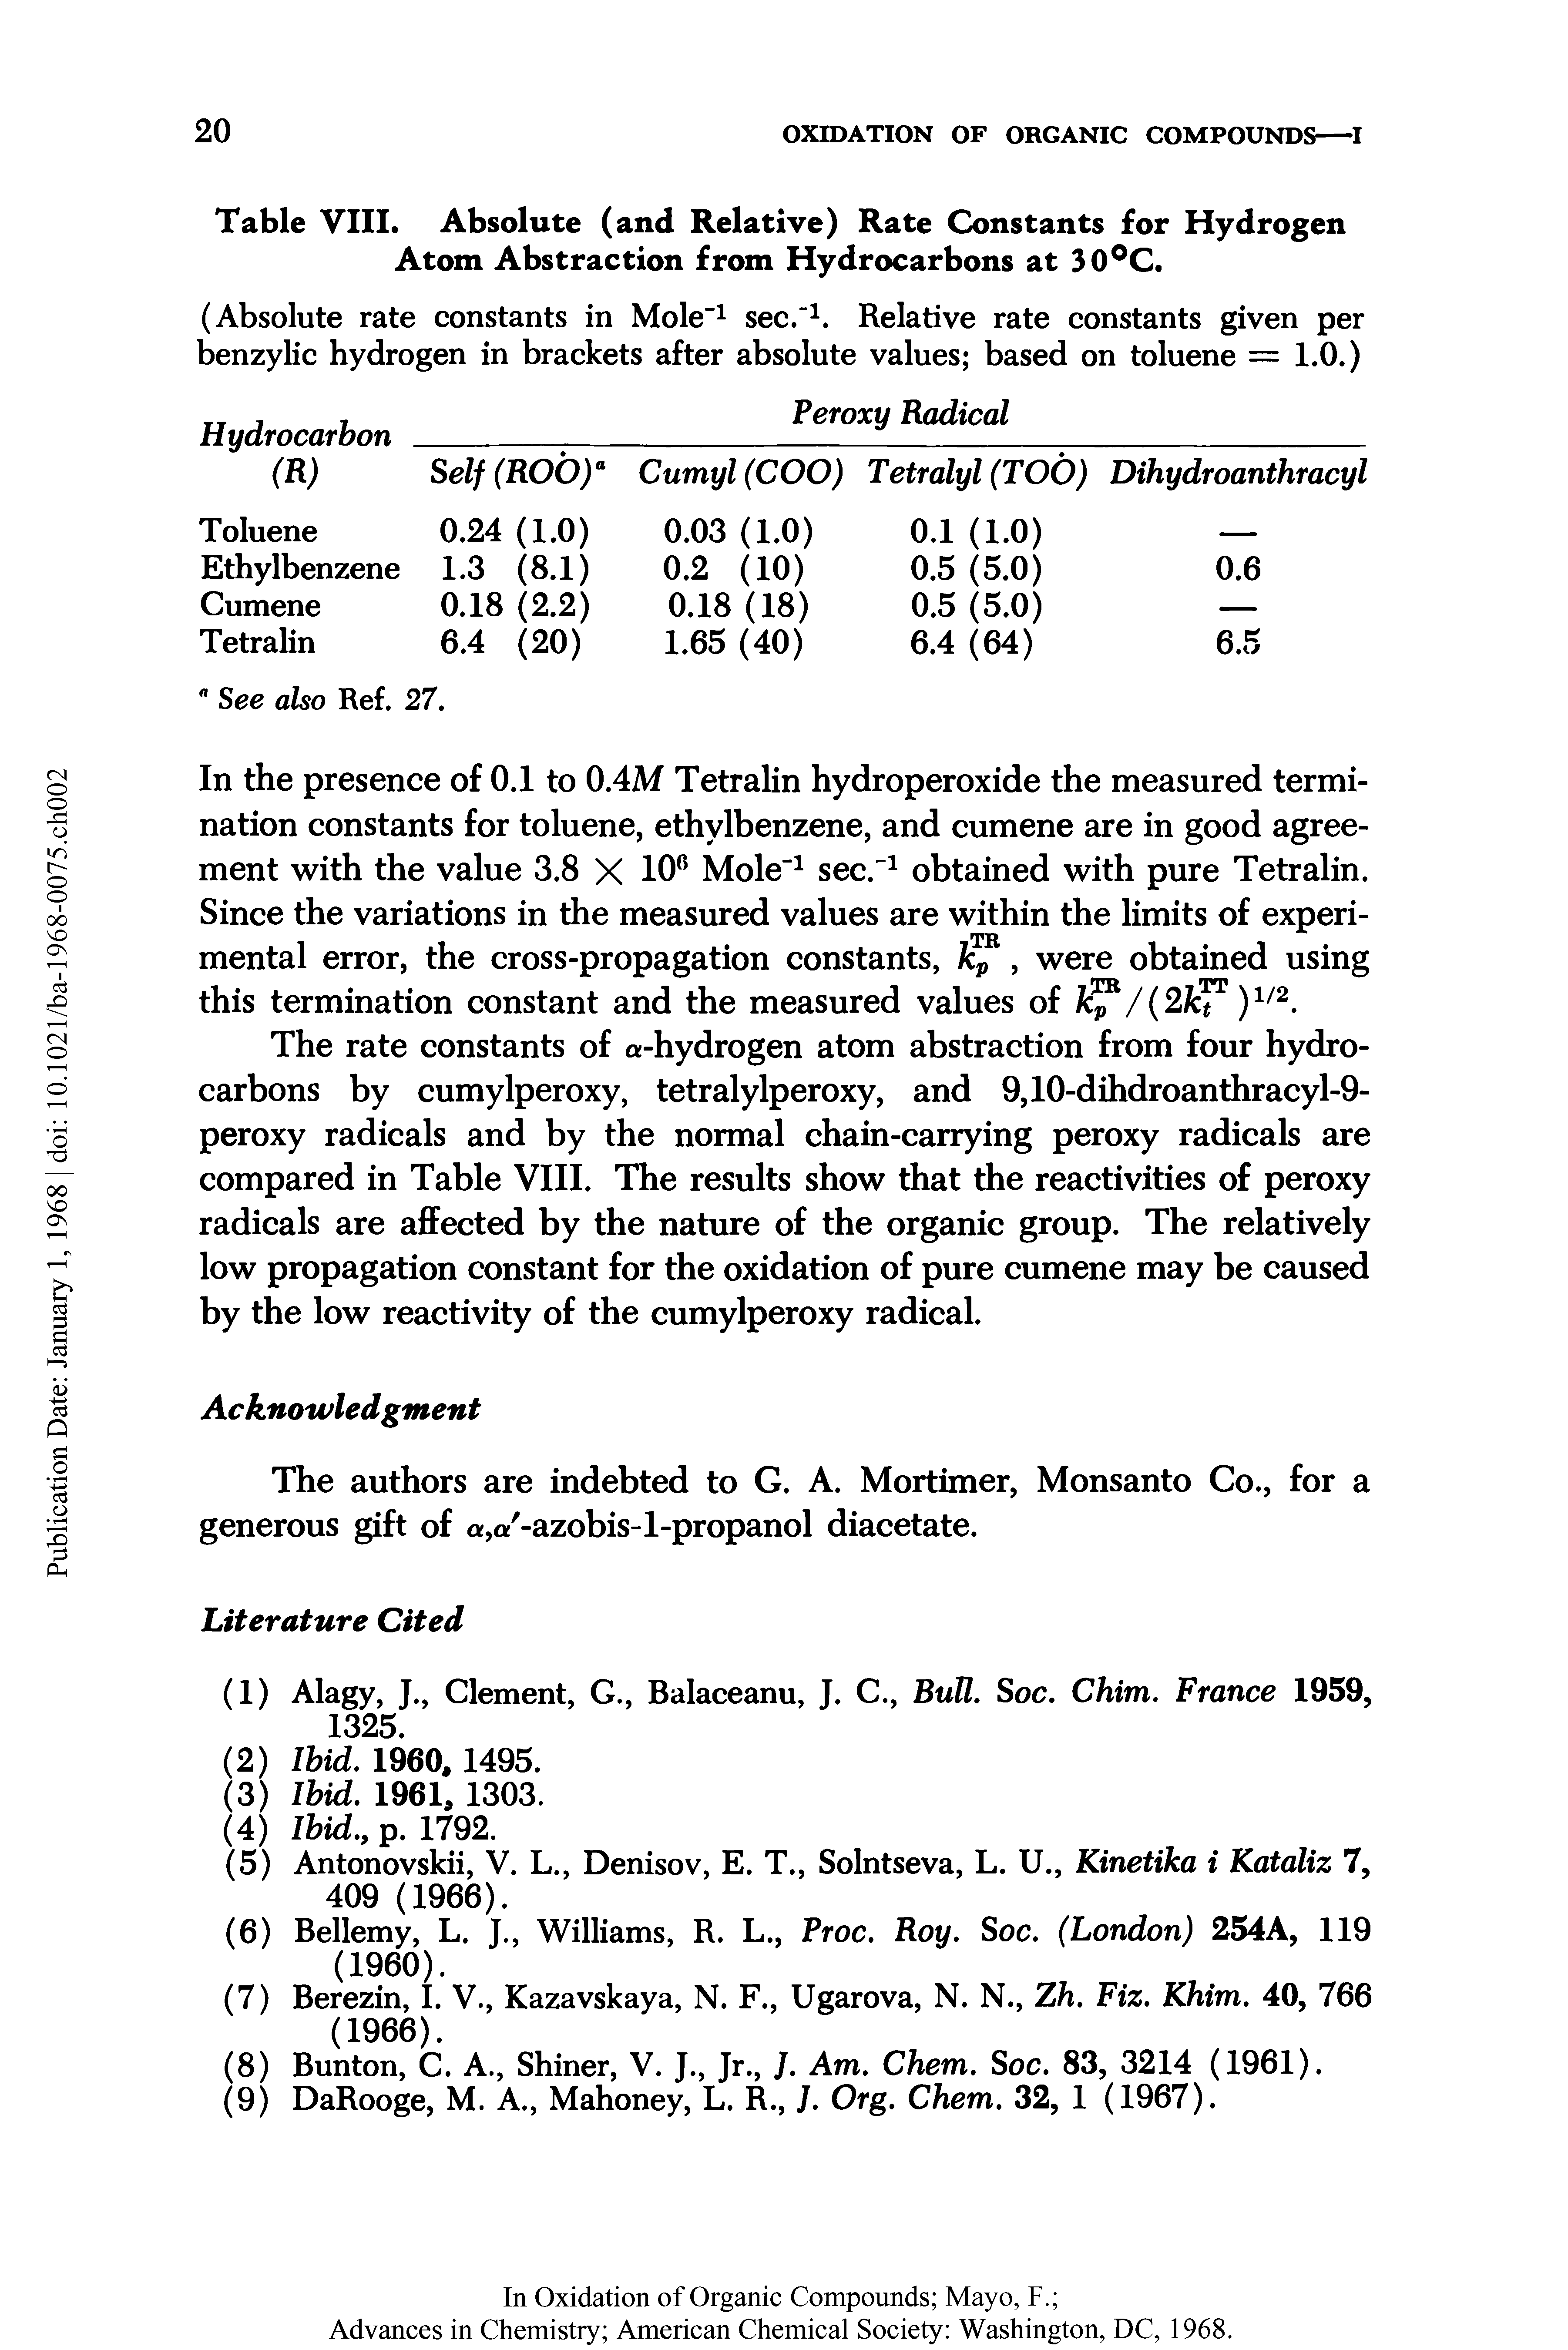 Table VIII. Absolute (and Relative) Rate Constants for Hydrogen Atom Abstraction from Hydrocarbons at 30°C.